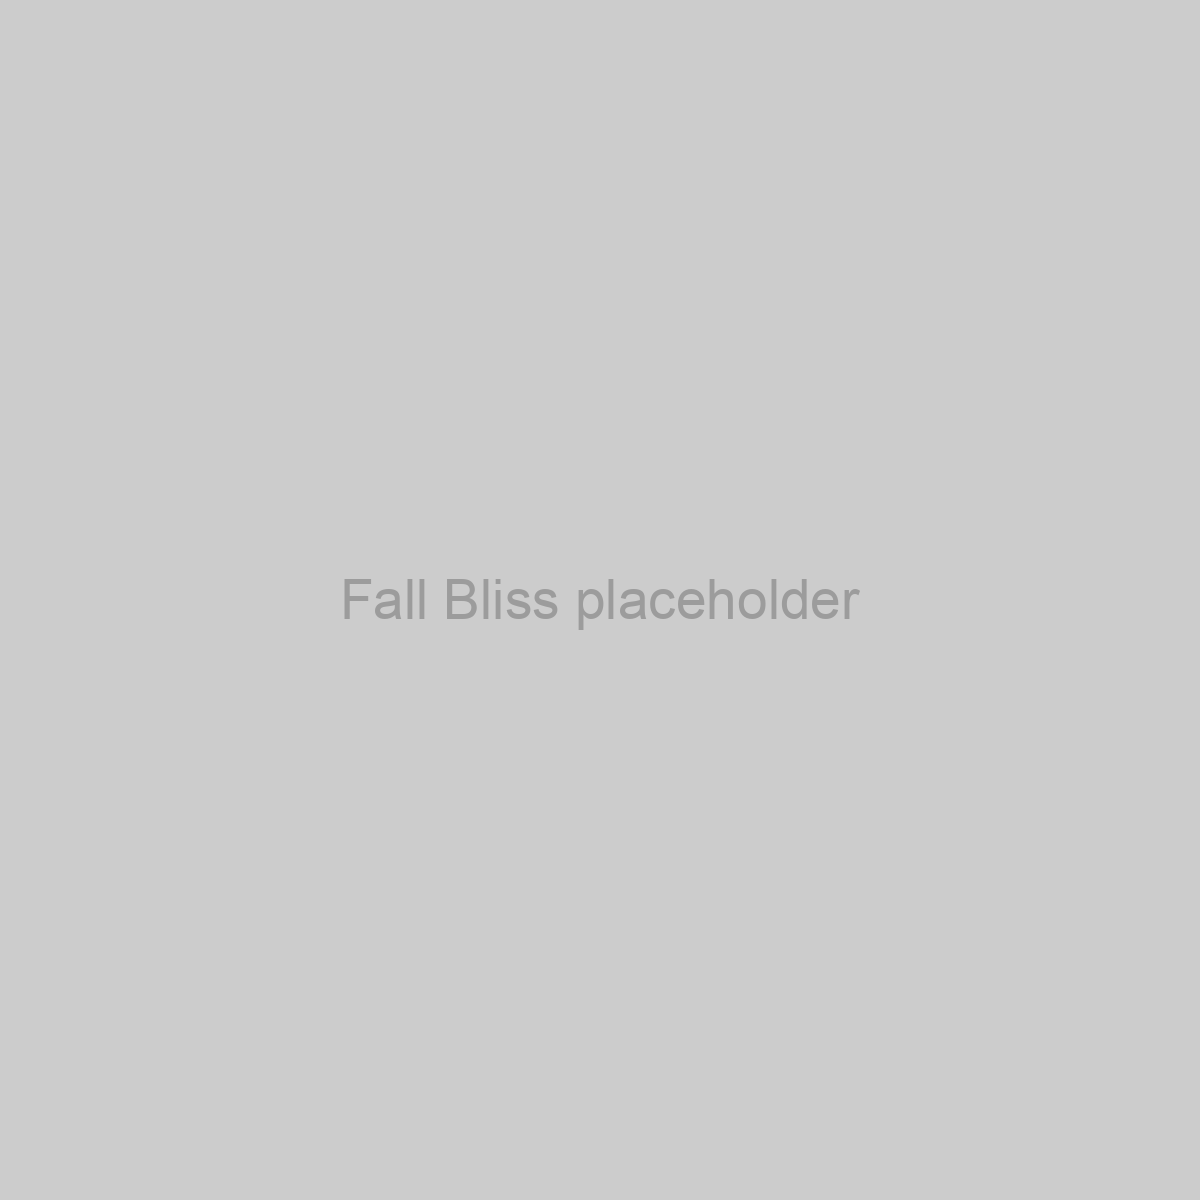 Fall Bliss Placeholder Image